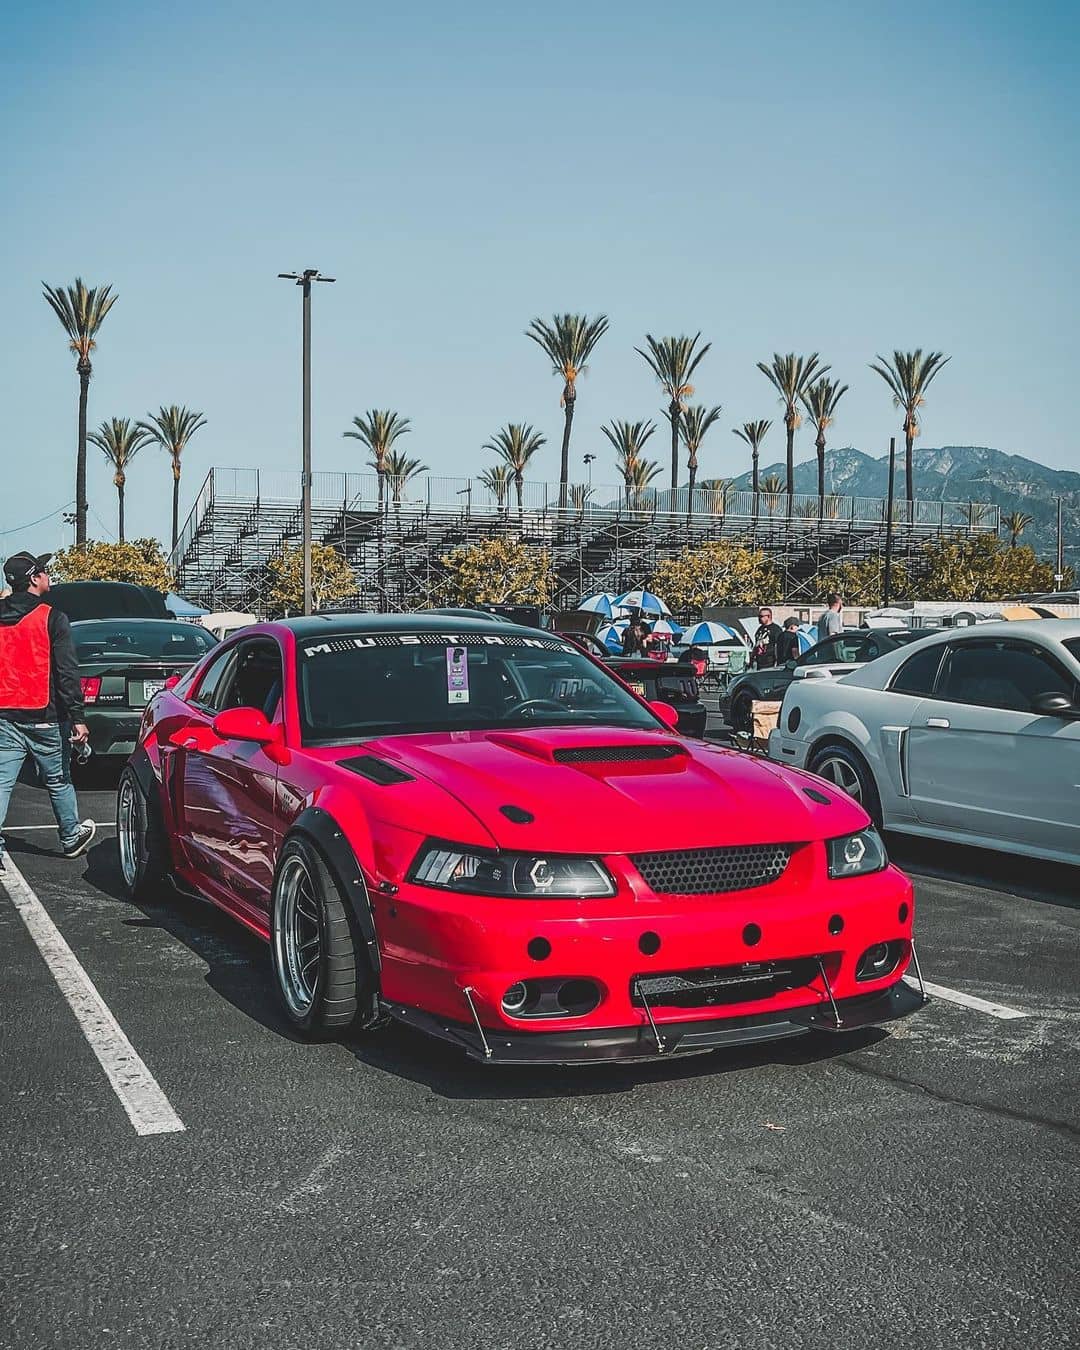 Widebody Ford Mustang SN95 With custom splitter